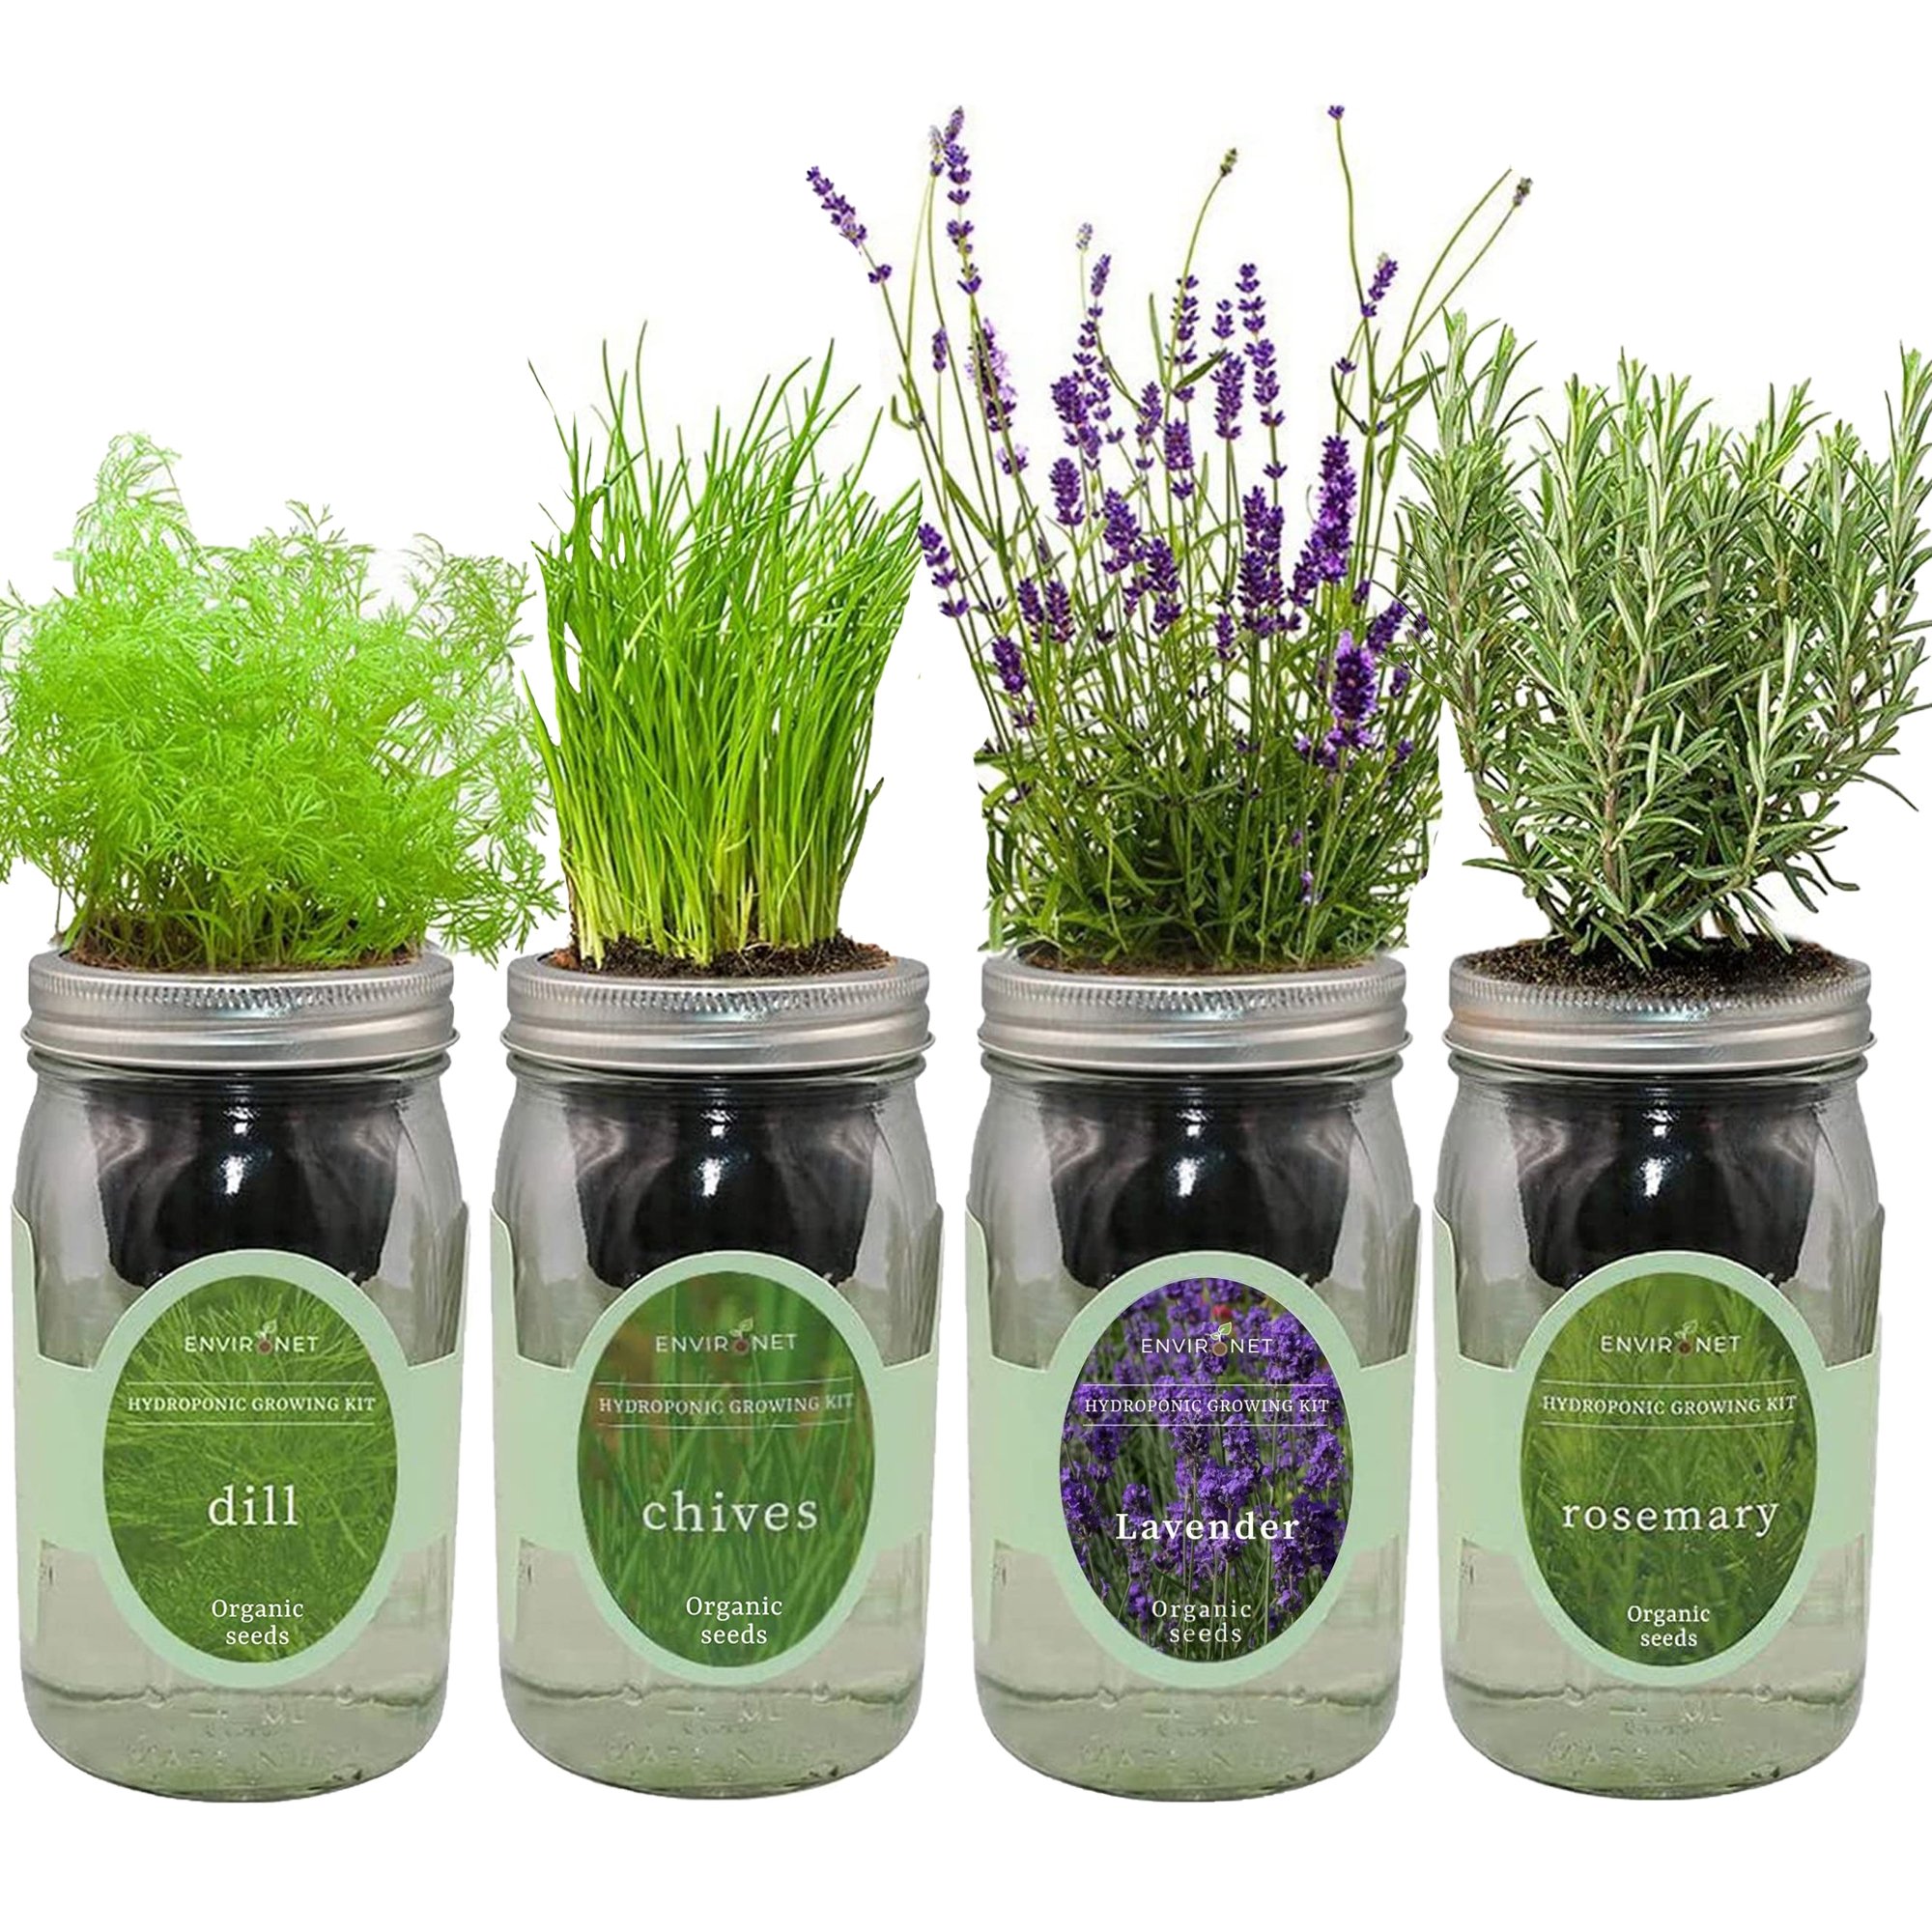 Hydroponic Herb Growing Kit Garden Bundle with Organic Seeds - Chives,Dill,Lavender, Rosemary